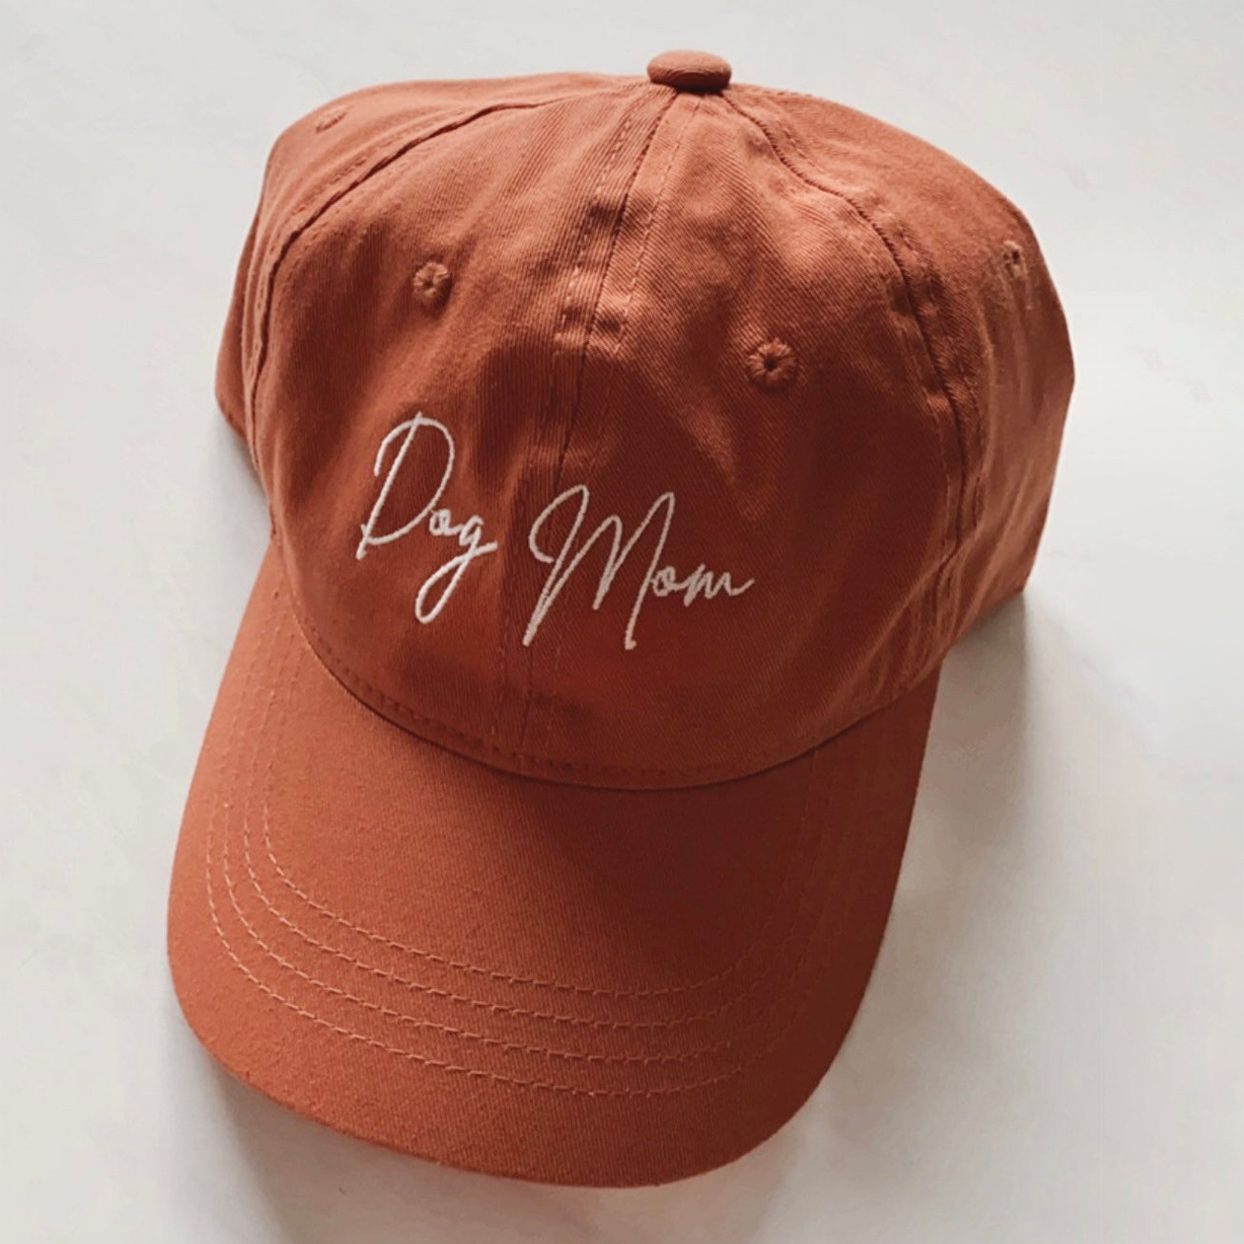 Product photo of a DOGMOM Minimalist Hat on an off-white background